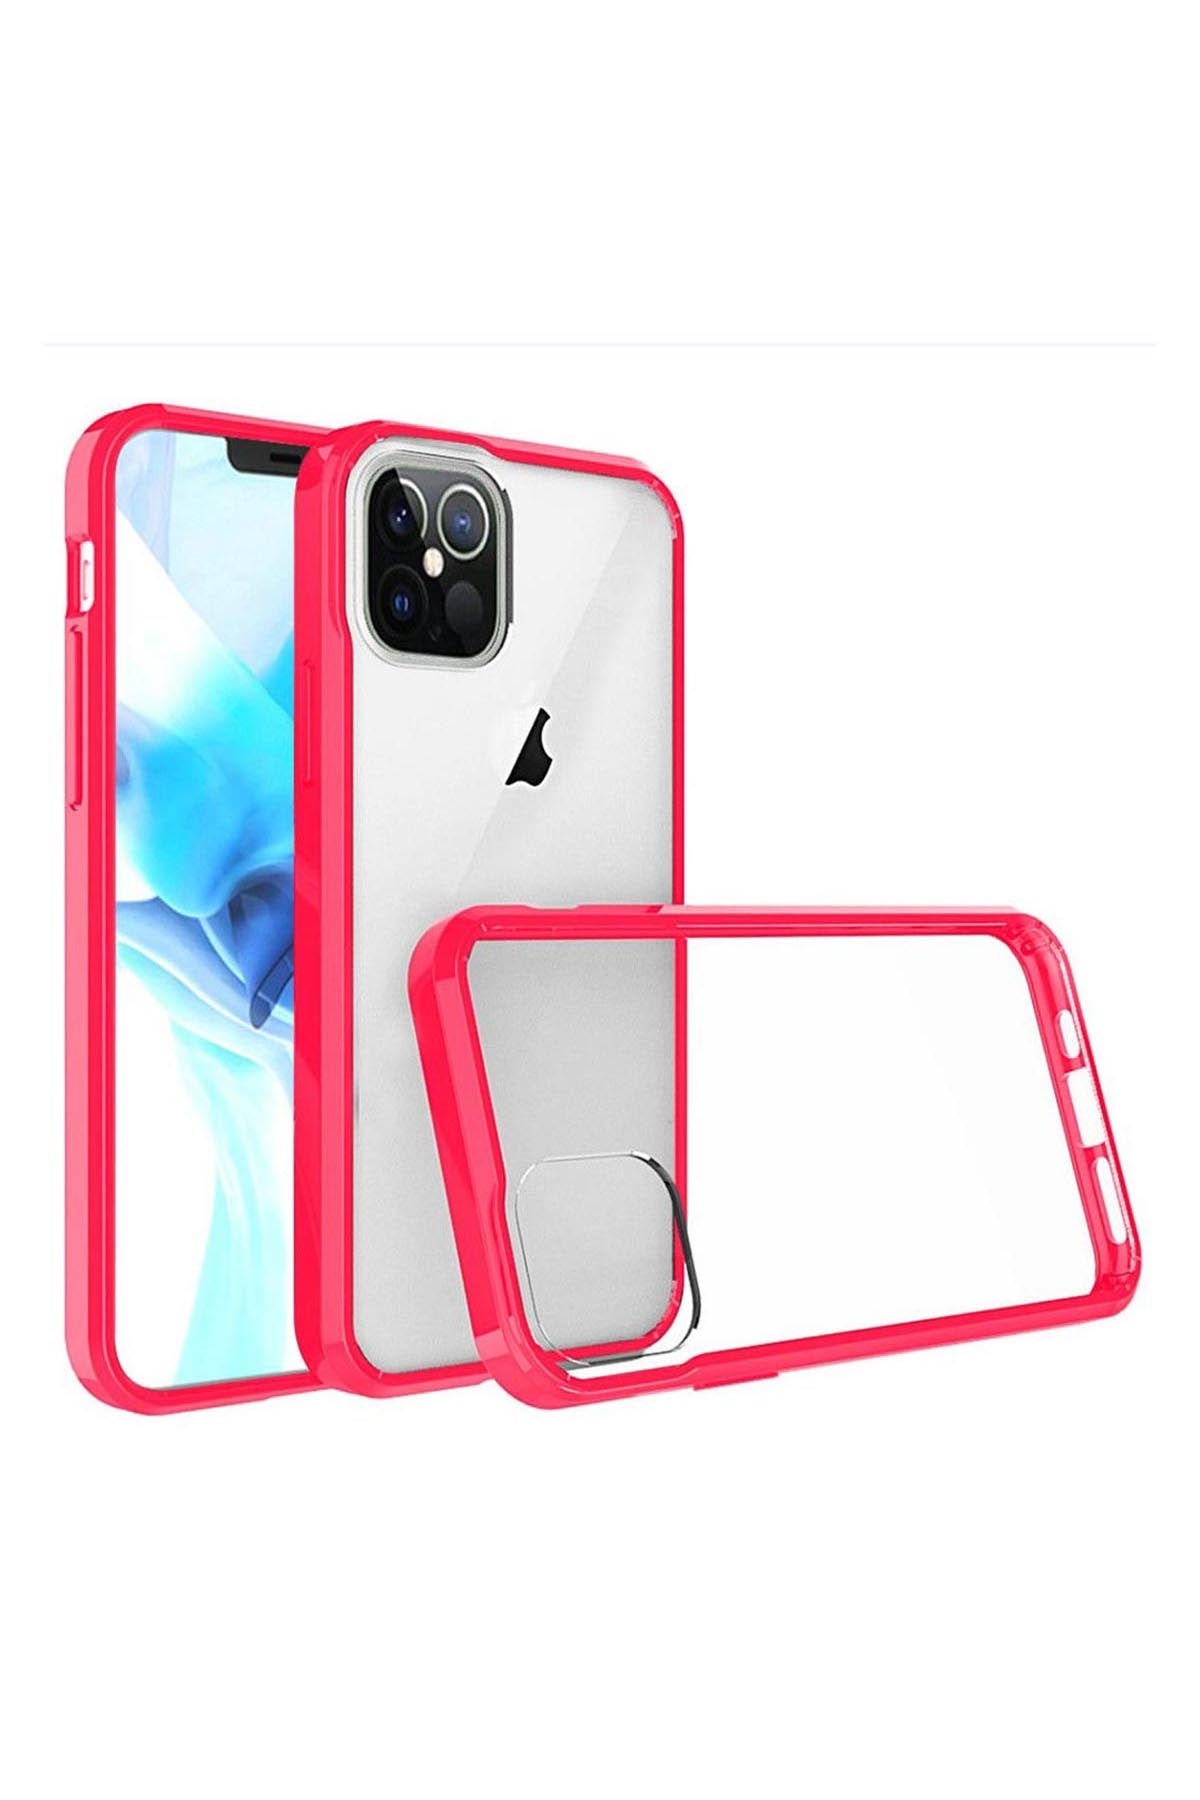 CLRHPNK - FOR iPHONE 12 PRO MAX 6.7 BUMPER CLEAR TRANSPARENT CASE COVER